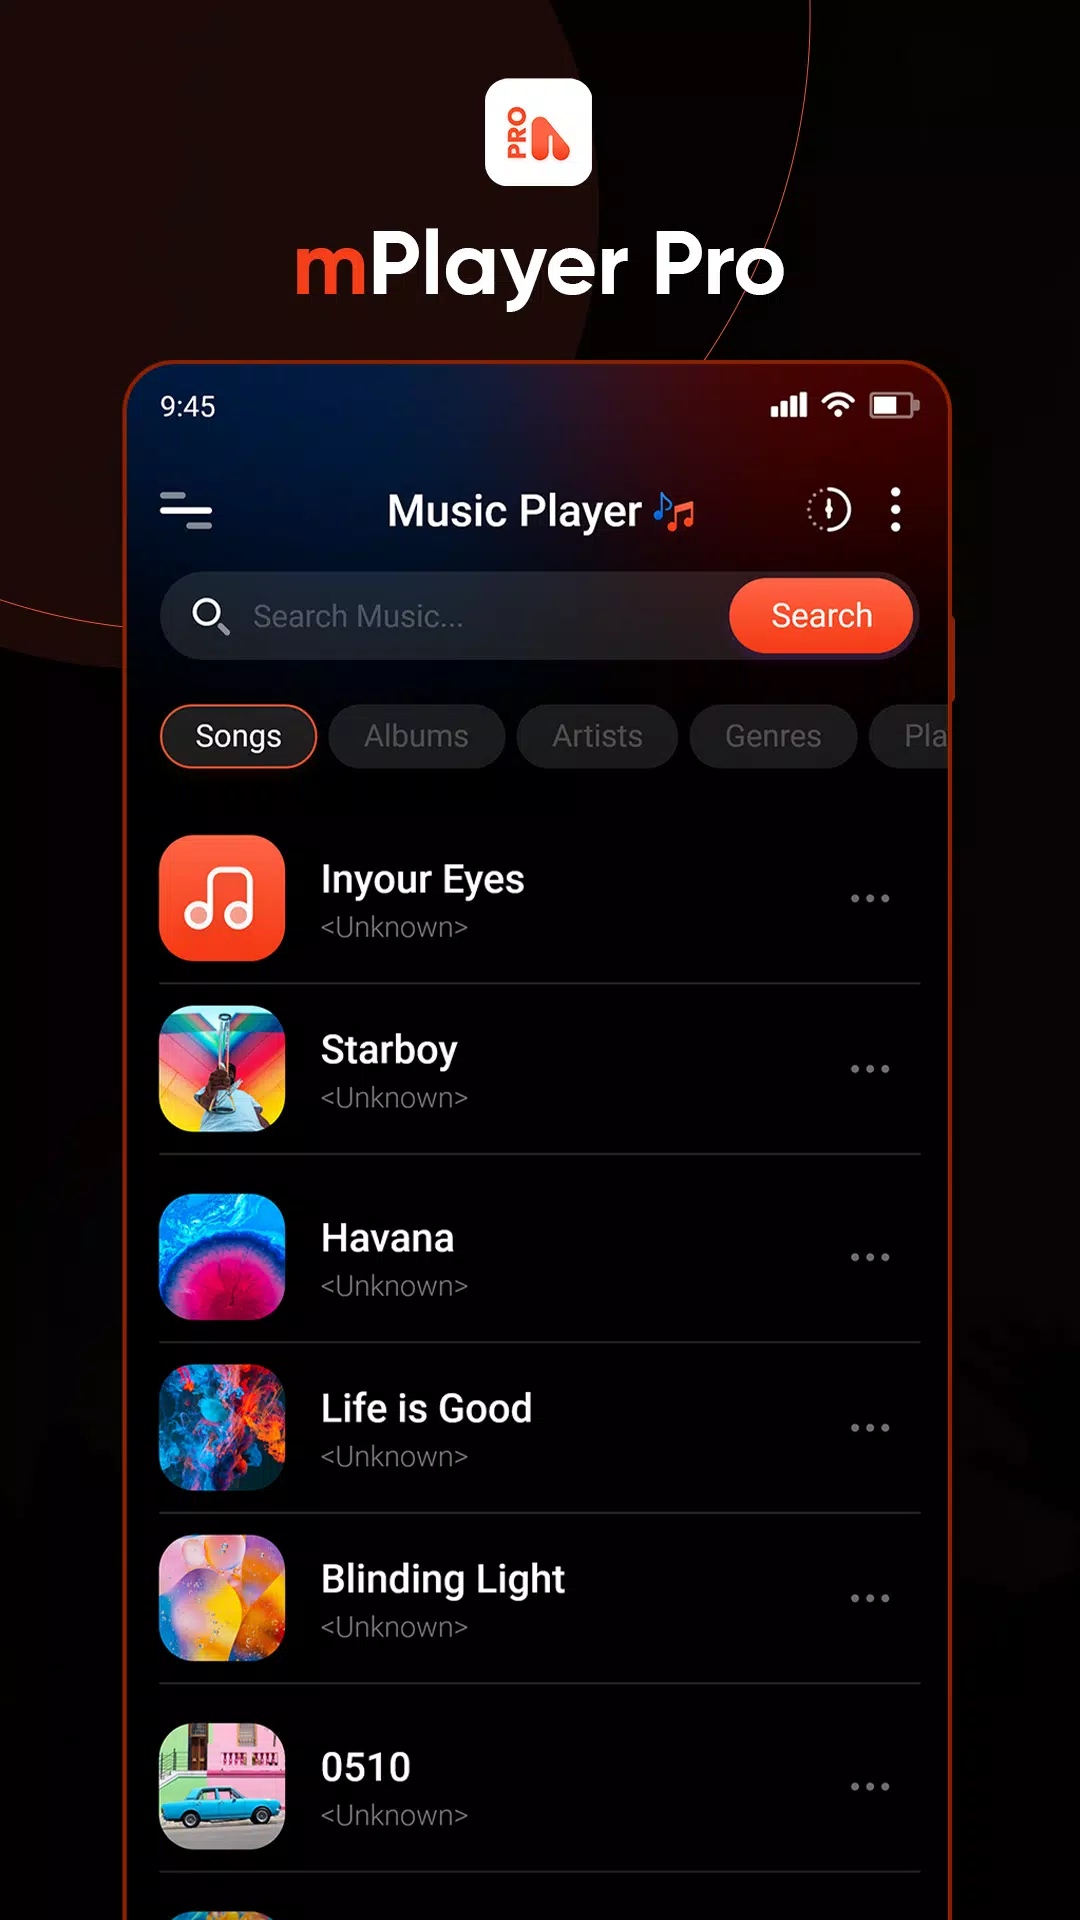 mPlayer Pro - Music Player MP3 Latest Version 0.6 for Android